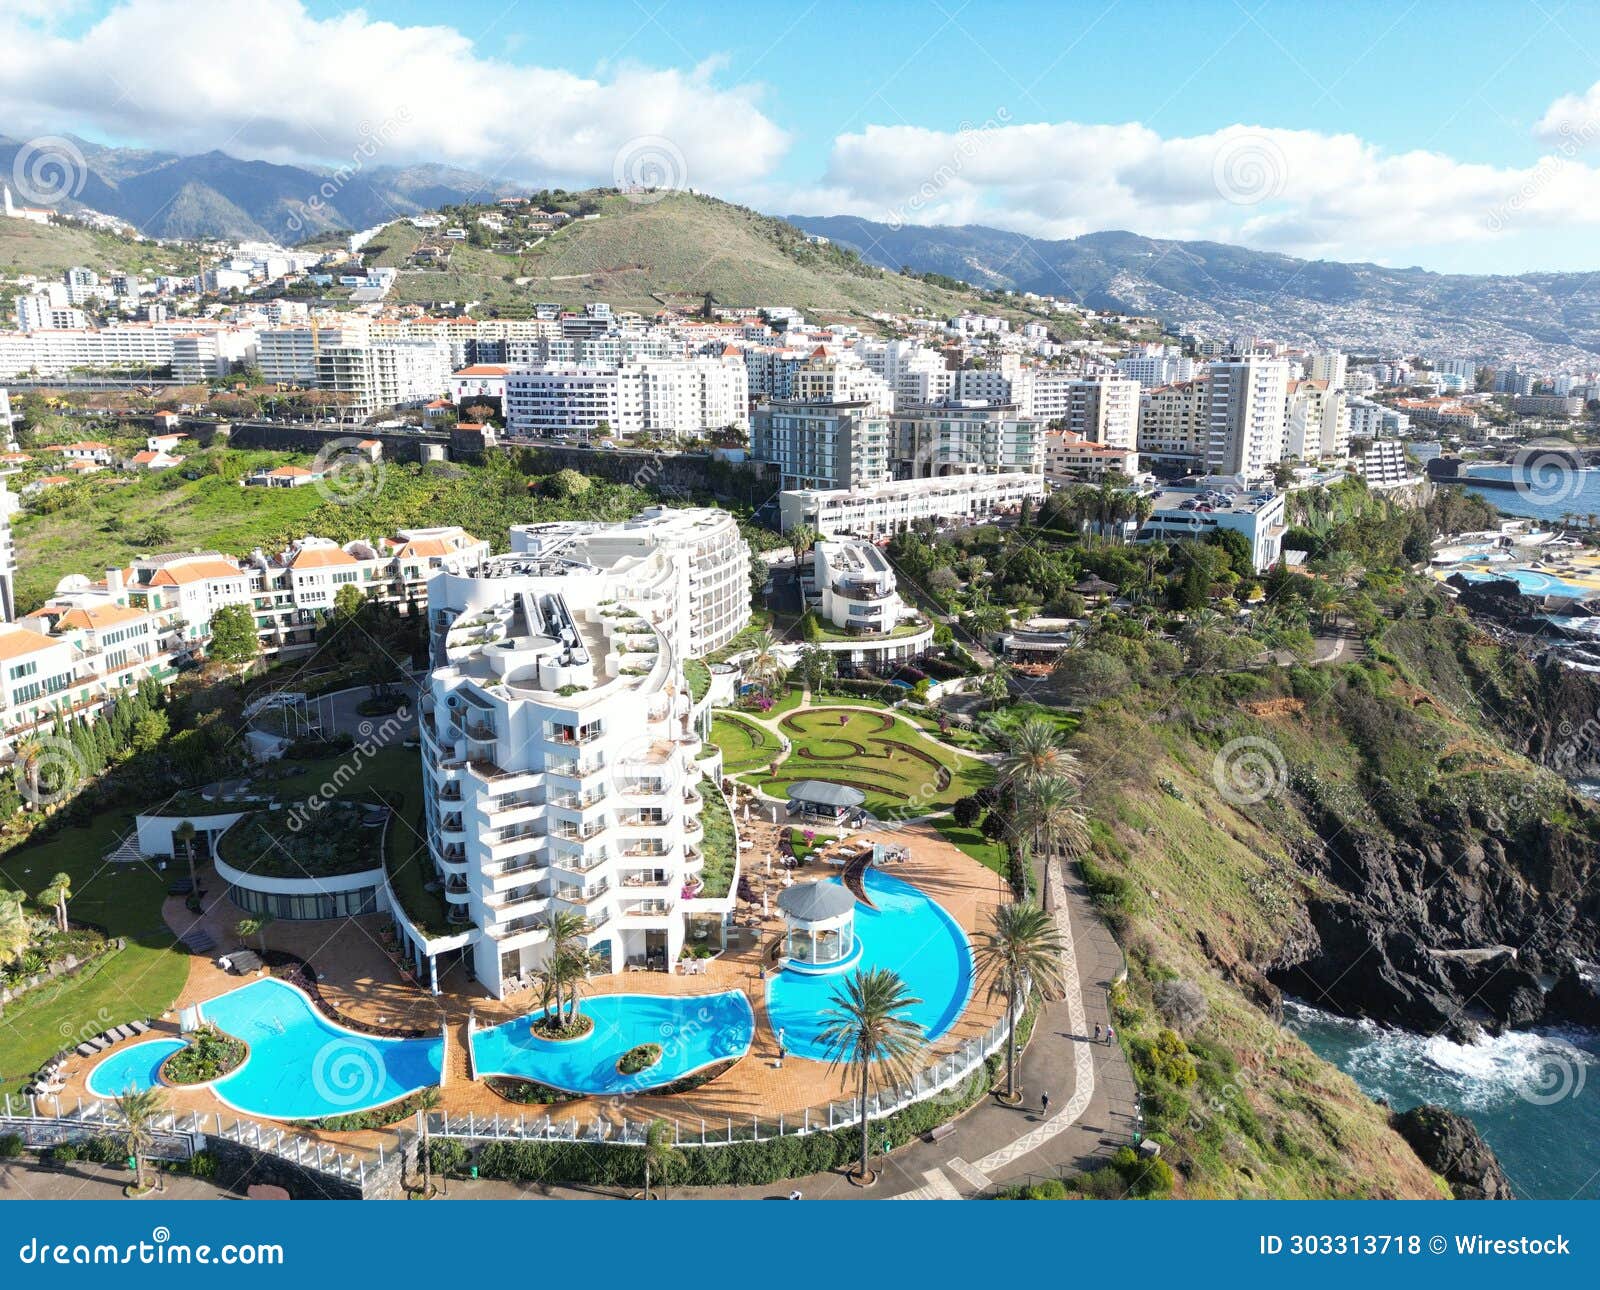 view of a residential area located by the sea: pestana grand hotel funchal madeira